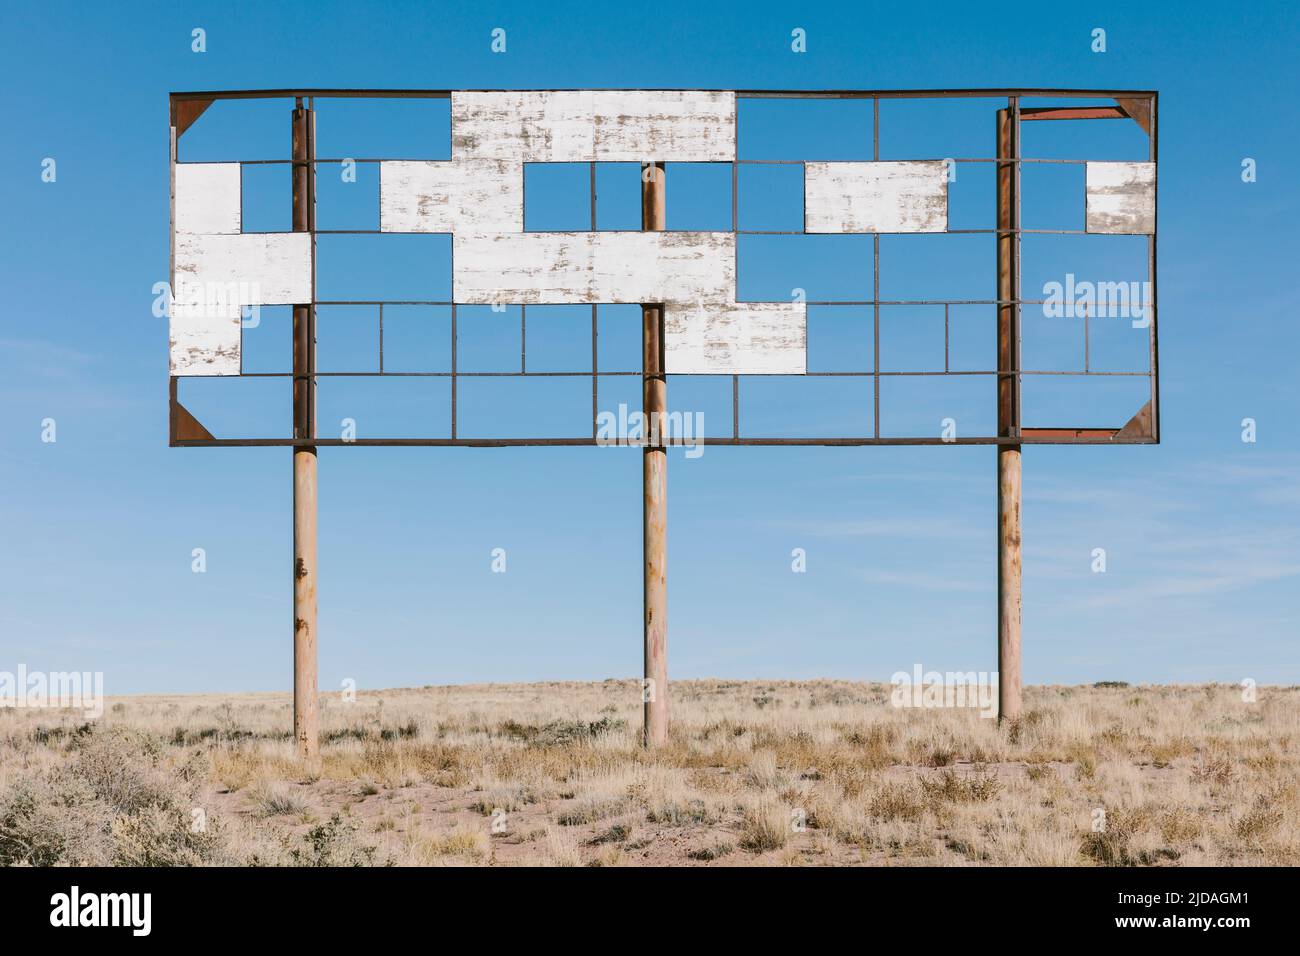 An old billboard, empty panels, in the middle of desert scrub. Stock Photo